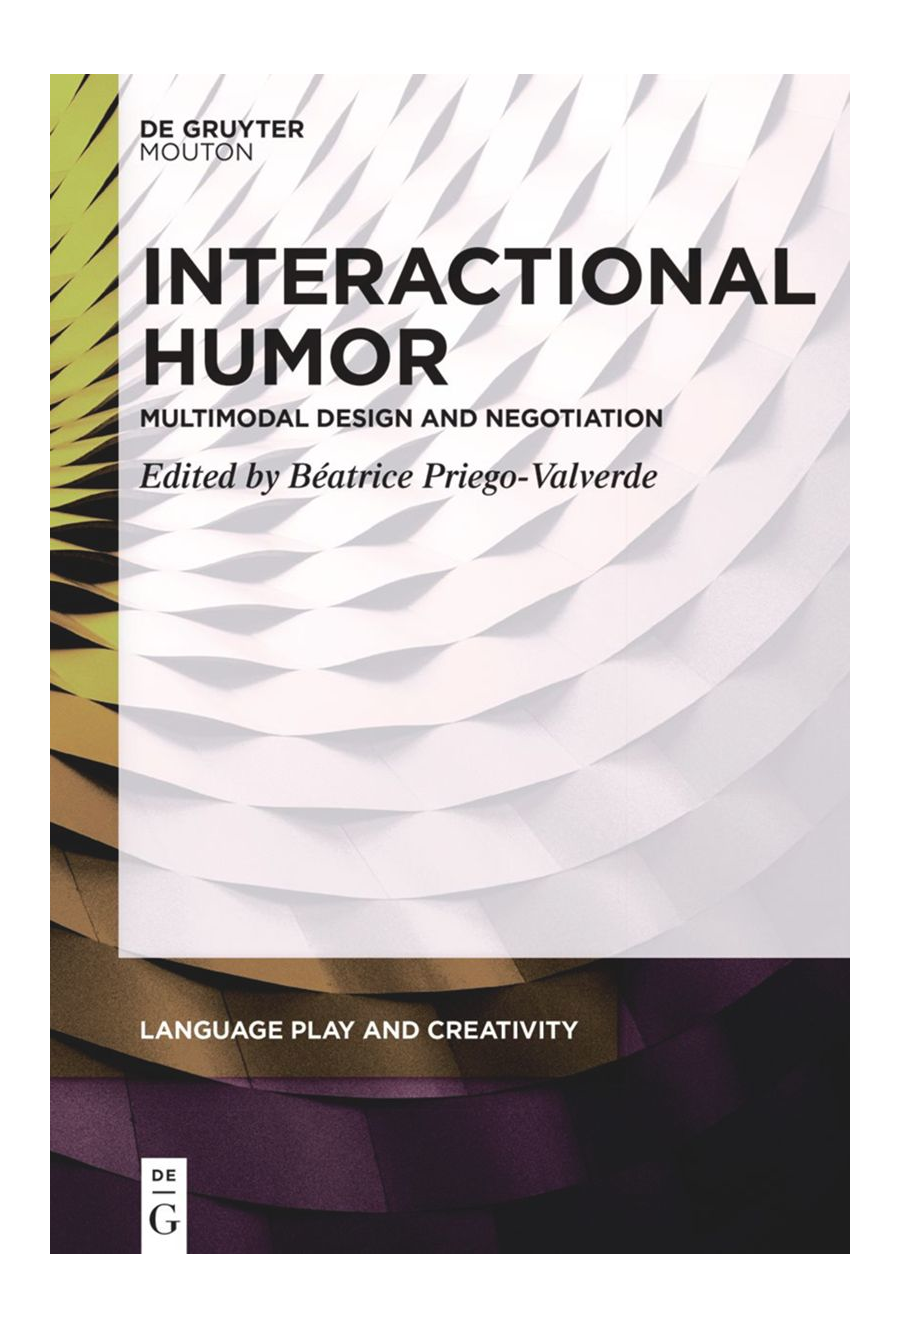 New publication on multimodal and interactional humor